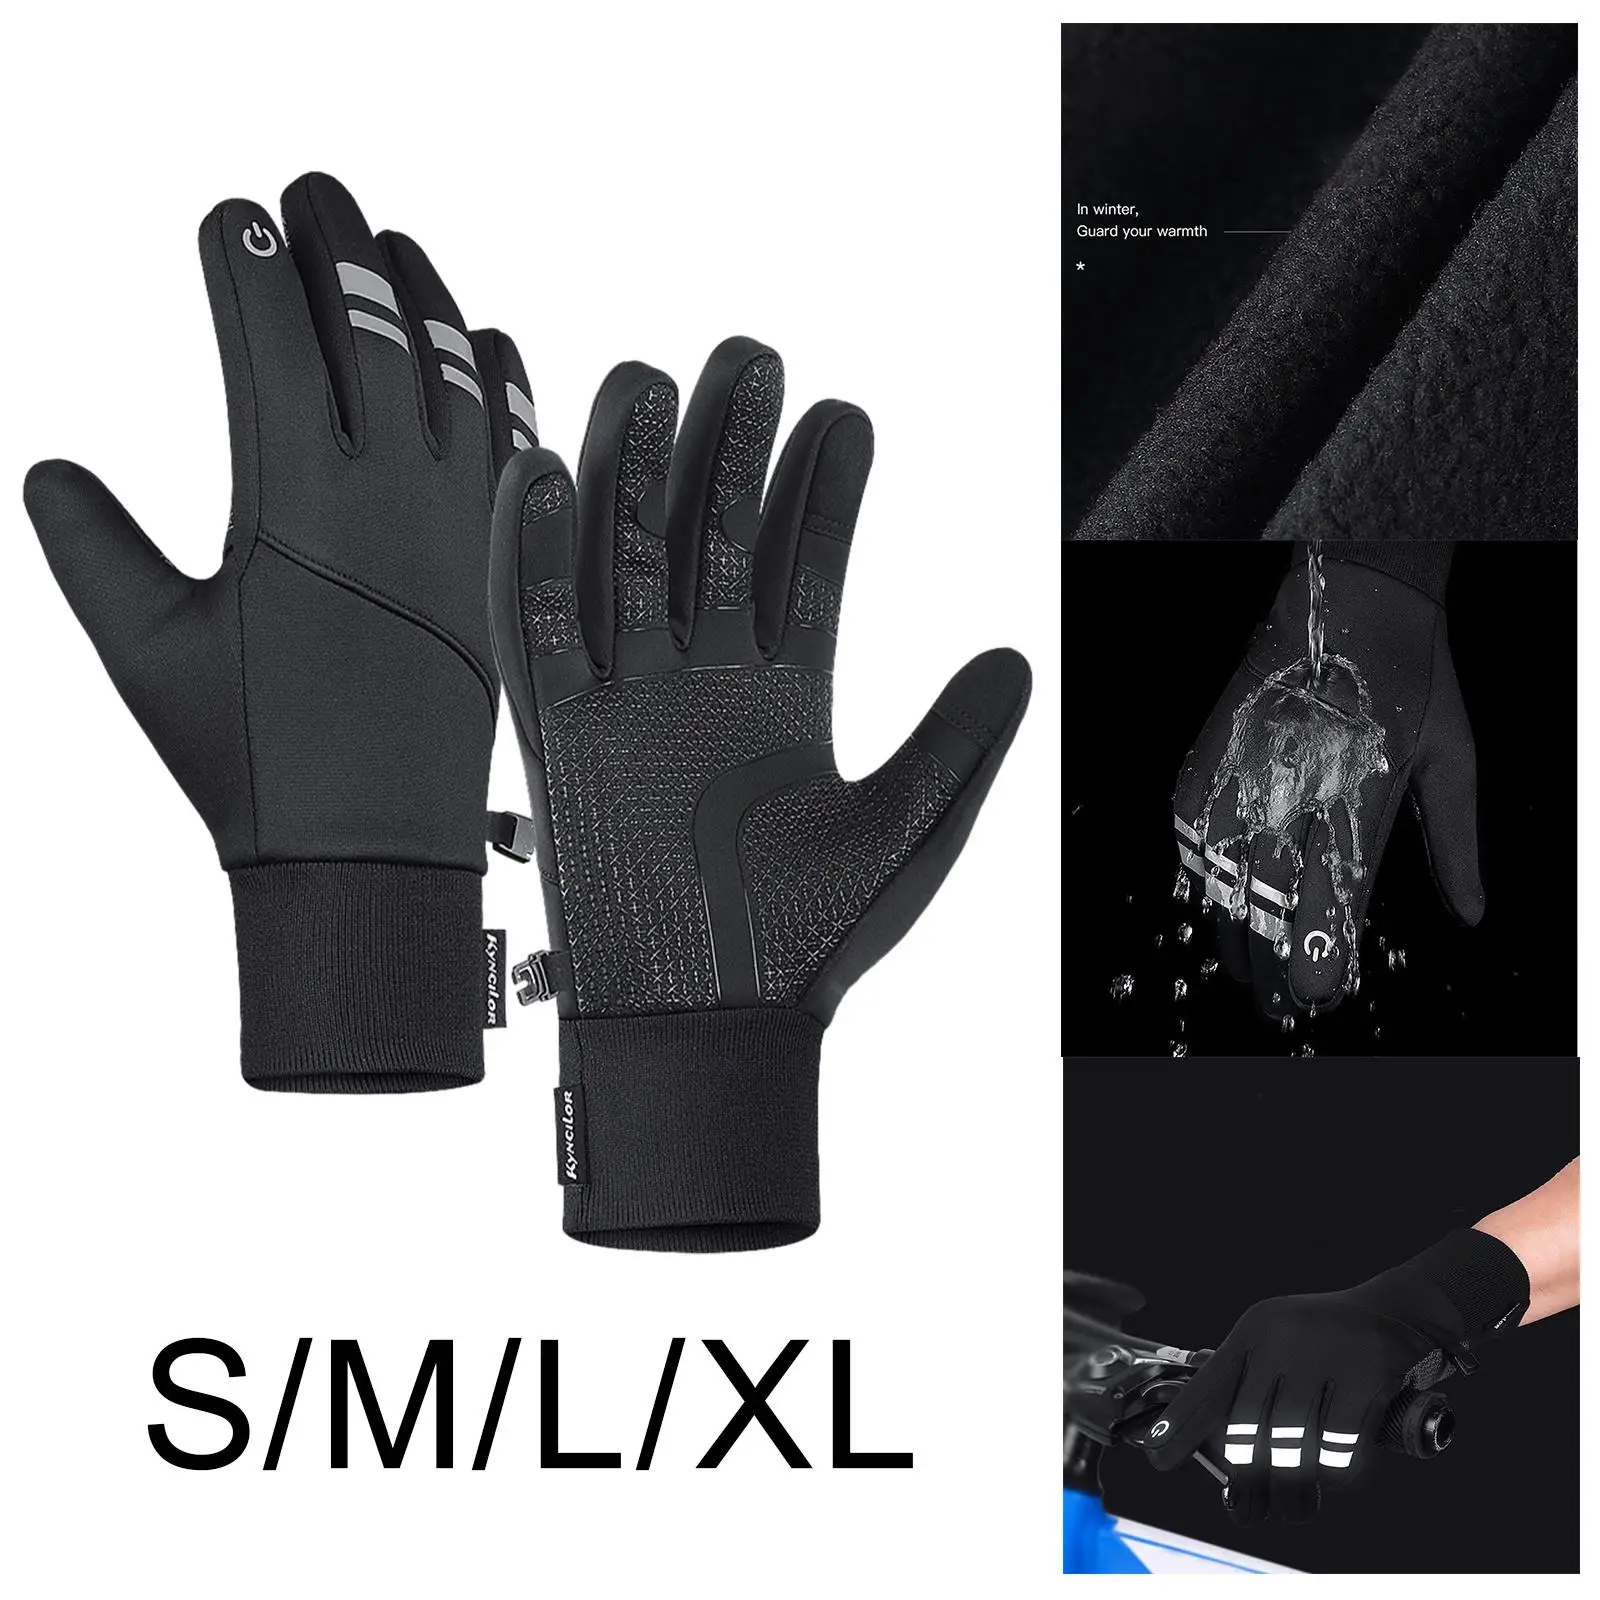 Winter Ski Gloves Touchscreen Mittens Waterproof Windproof Cycling Gloves Warm Mittens for Running Sports Driving Skating Riding